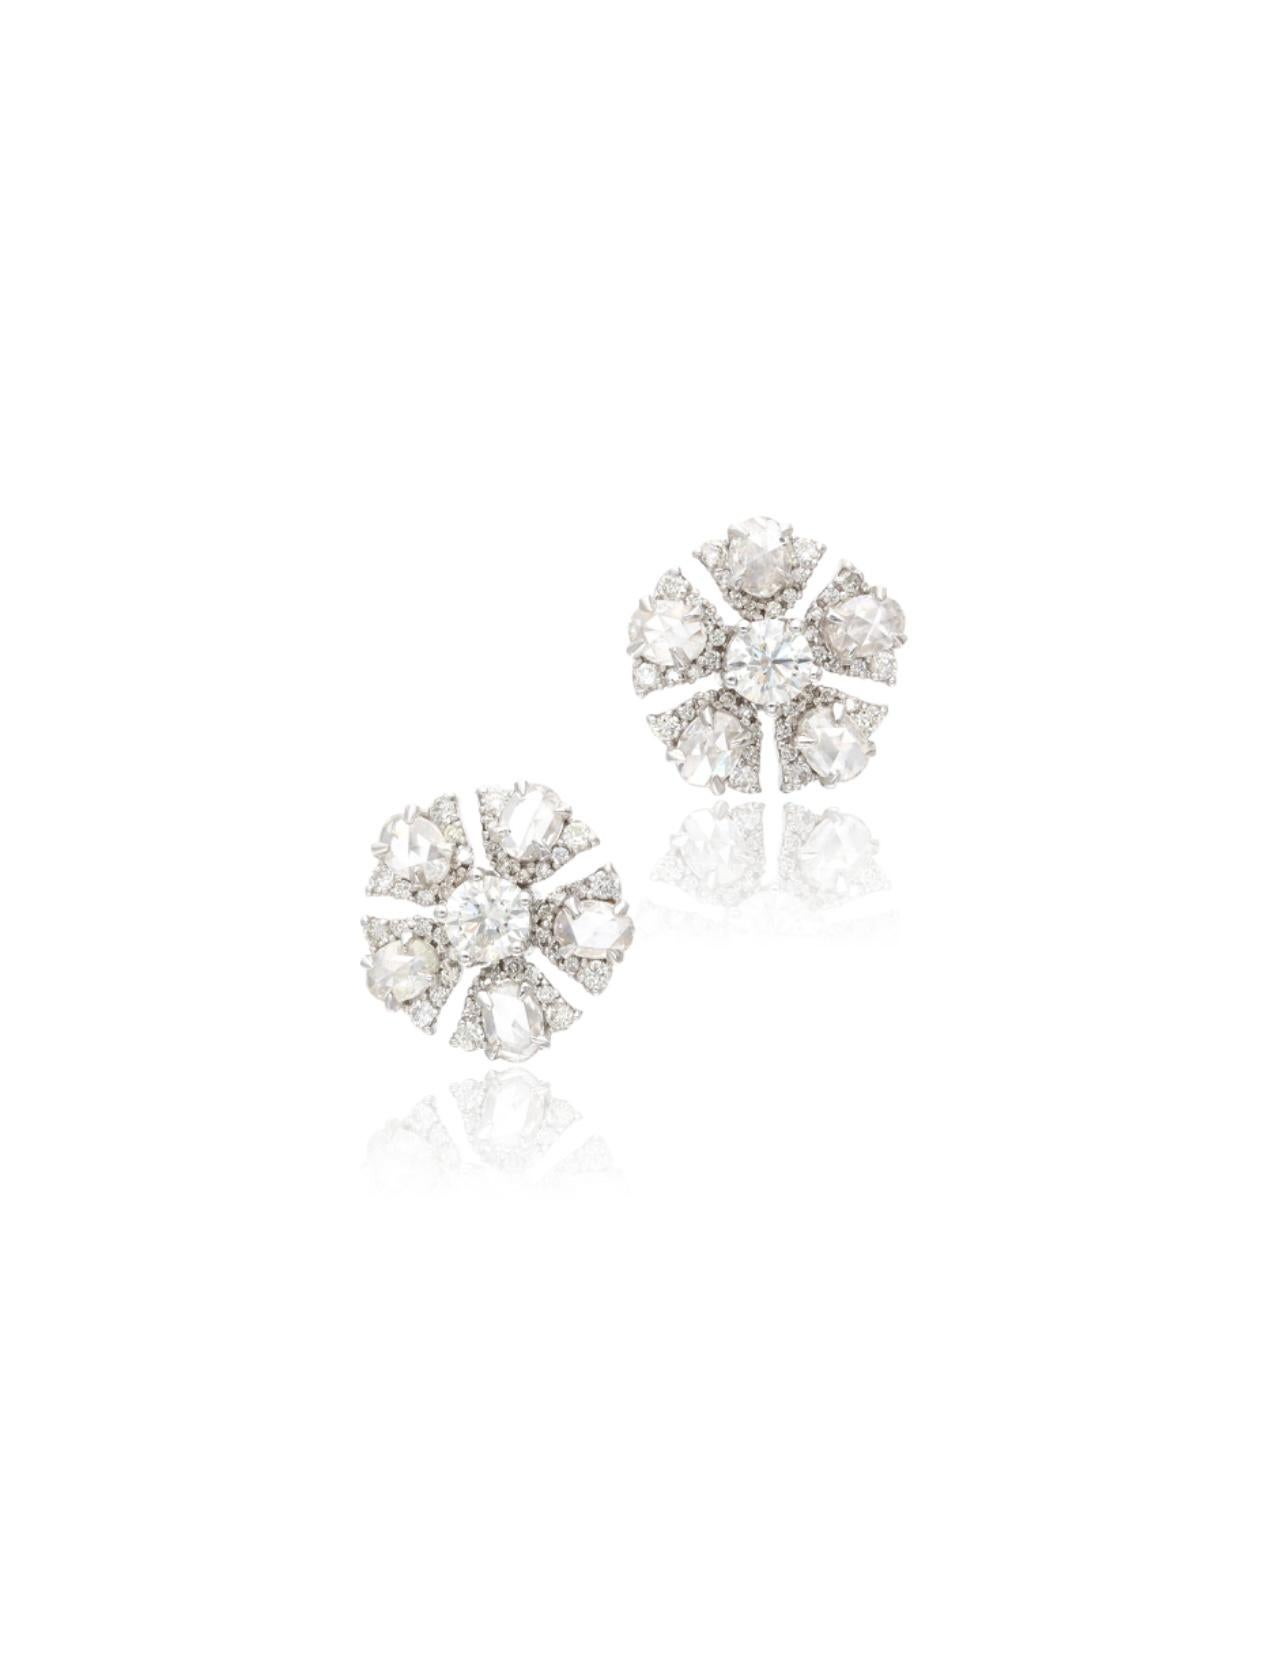 Rose Cut and Round Brilliant Diamond Stud Earrings in 18K Gold For Sale 4